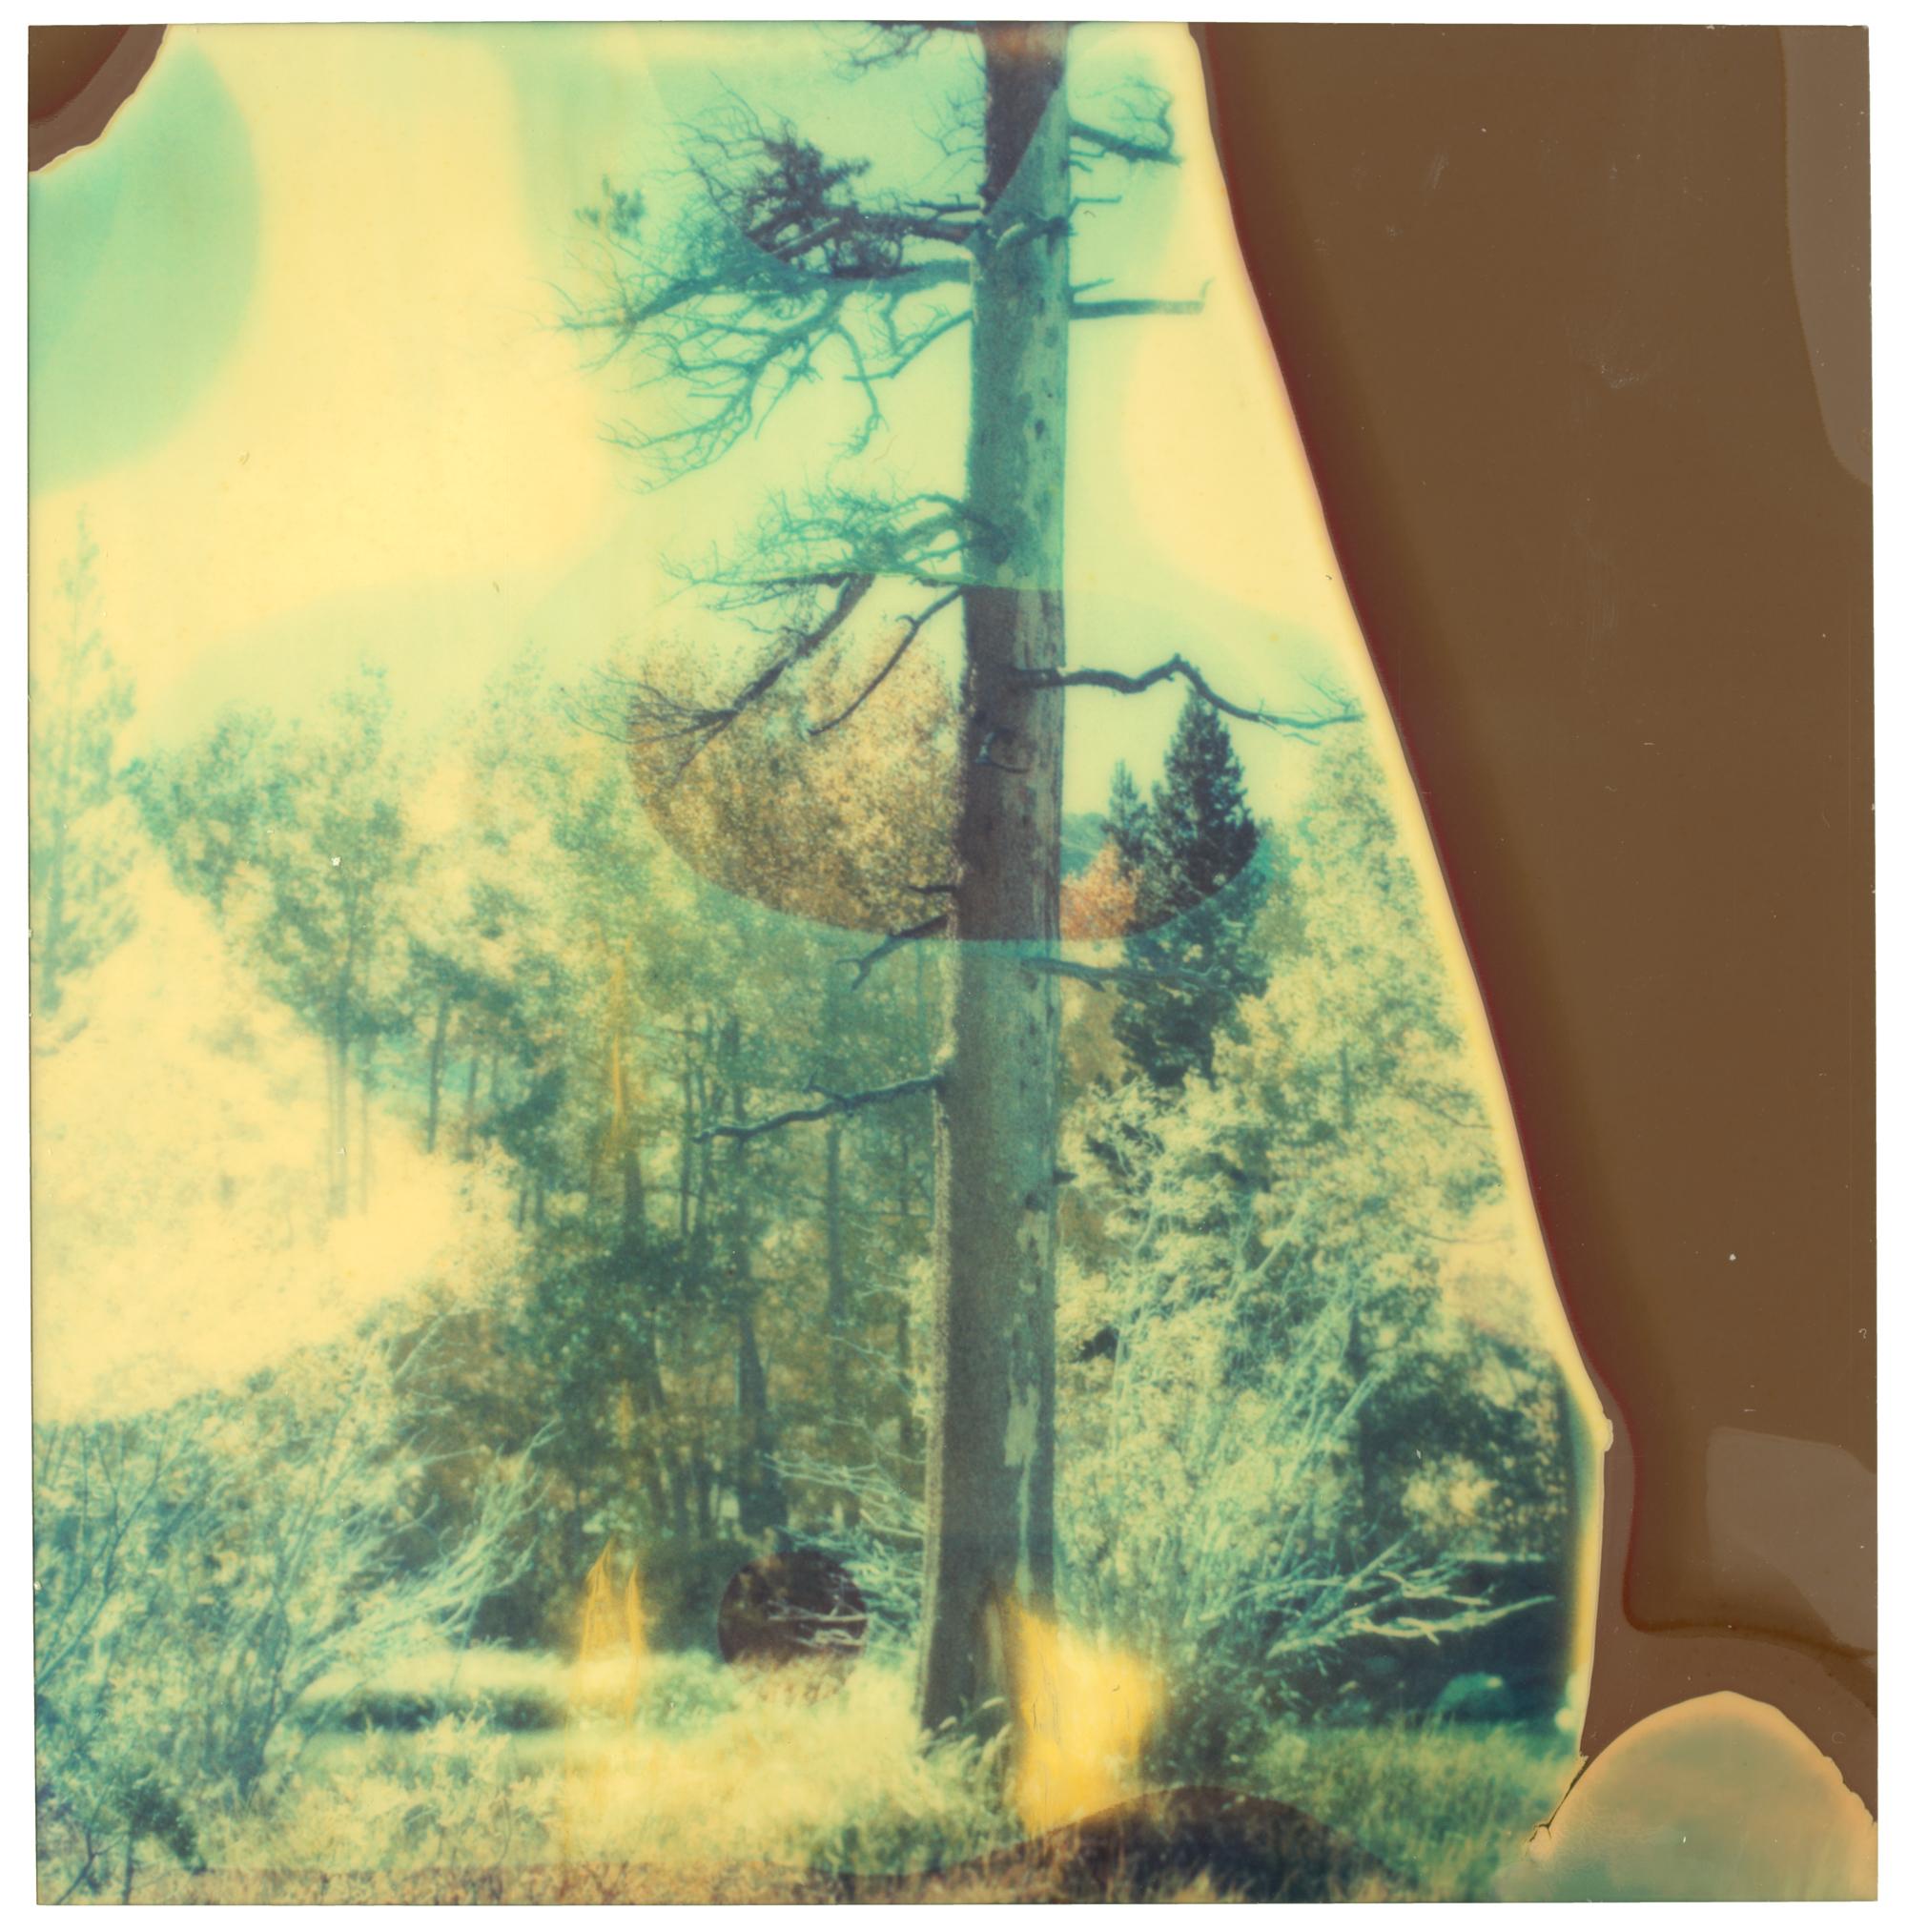 In the Range of Light III (Wastelands) - analog, Contemporary, Polaroid, Color - Photograph by Stefanie Schneider